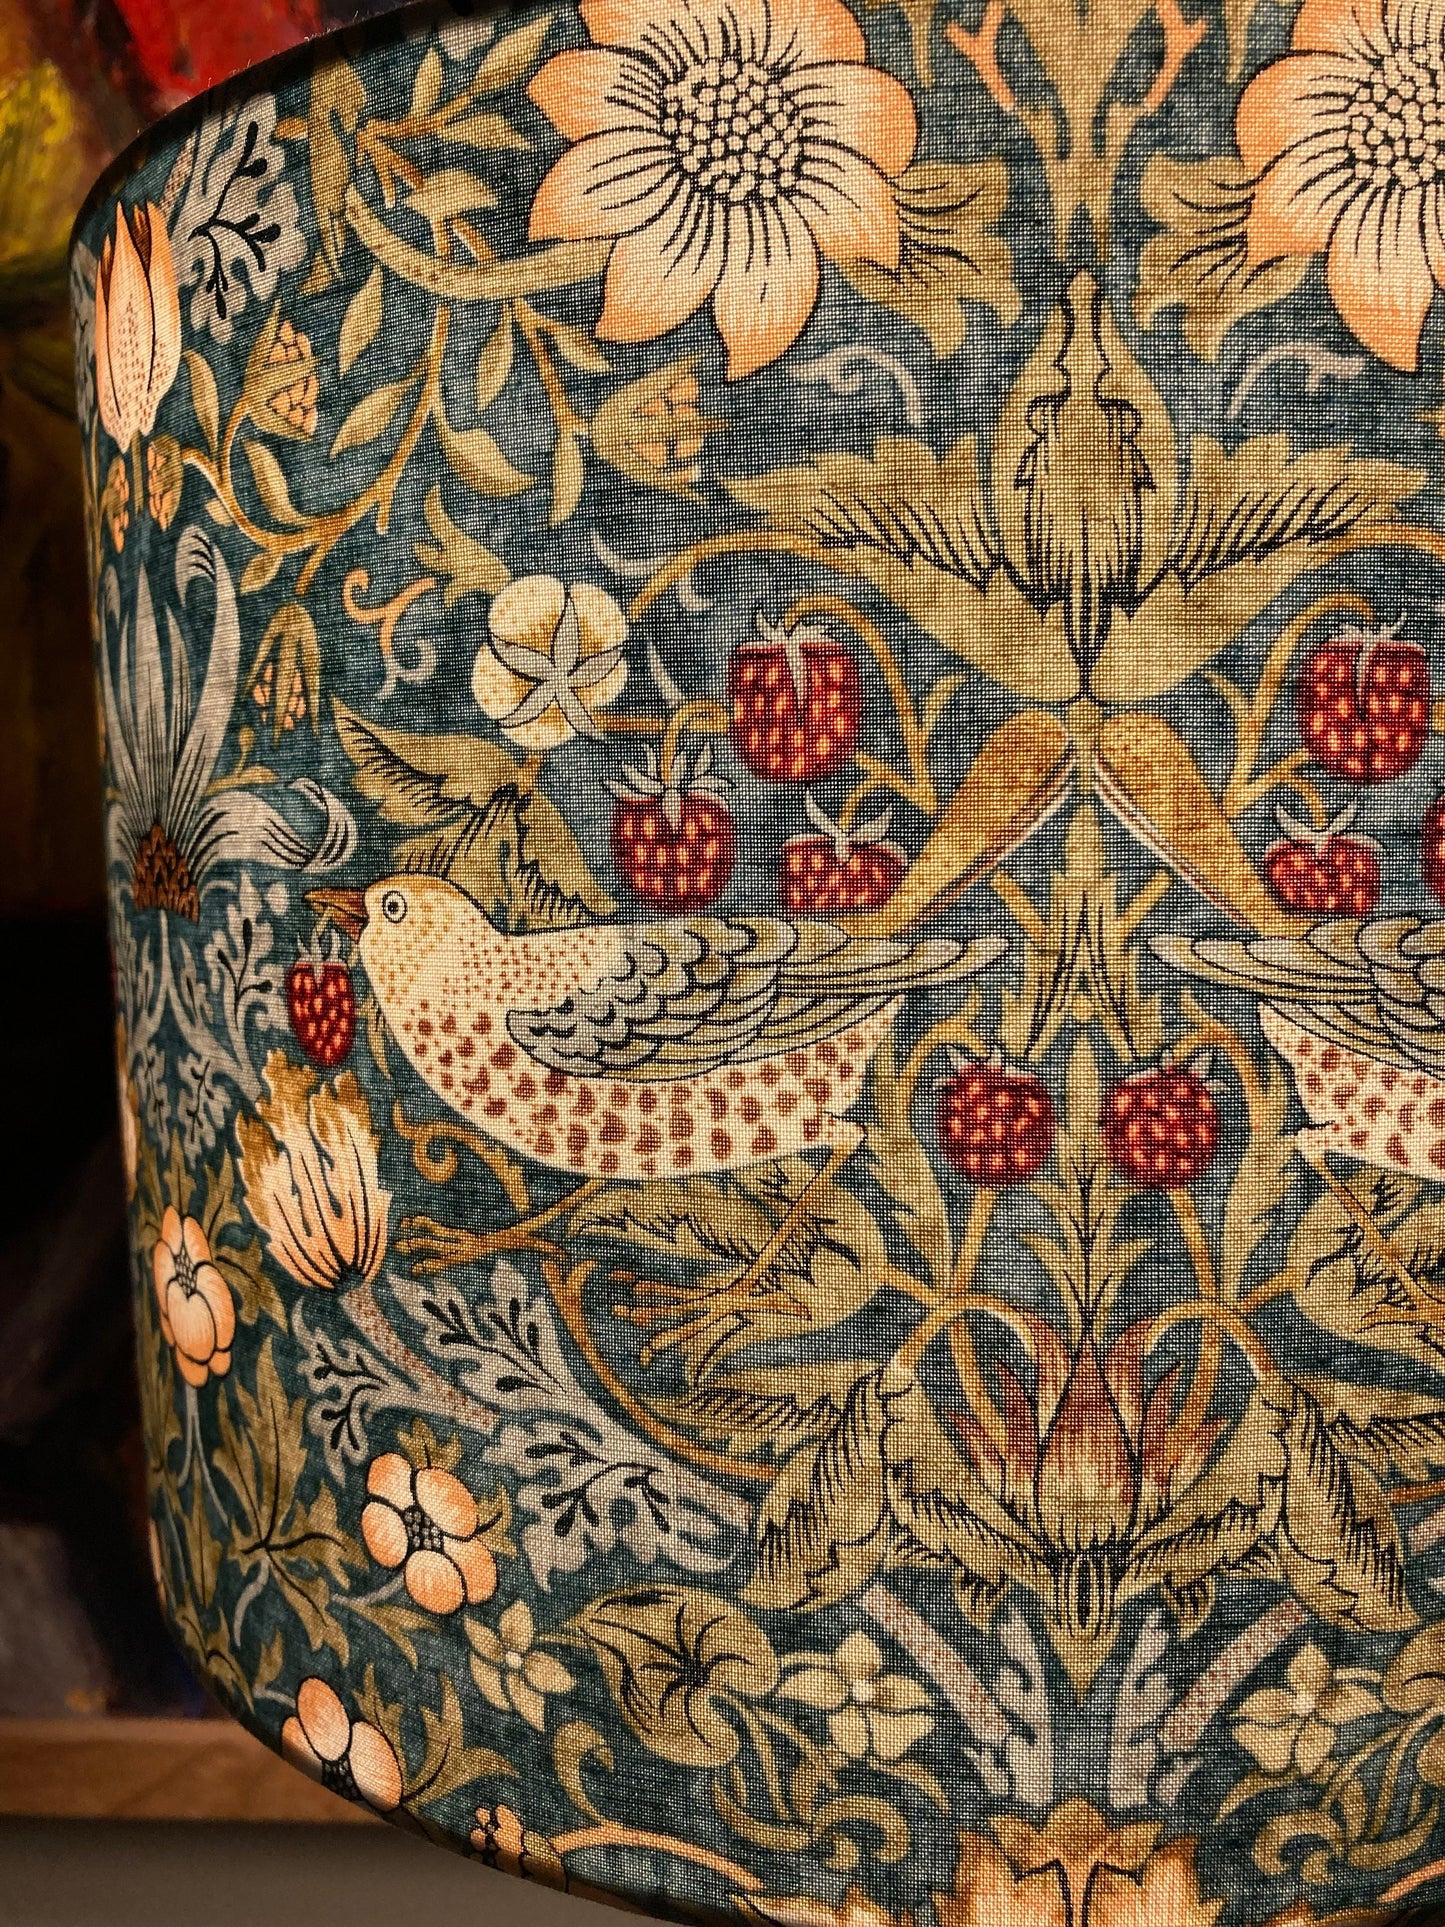 William Morris Green Strawberry Thief Fabric Lampshade for Table or Ceiling Lamps